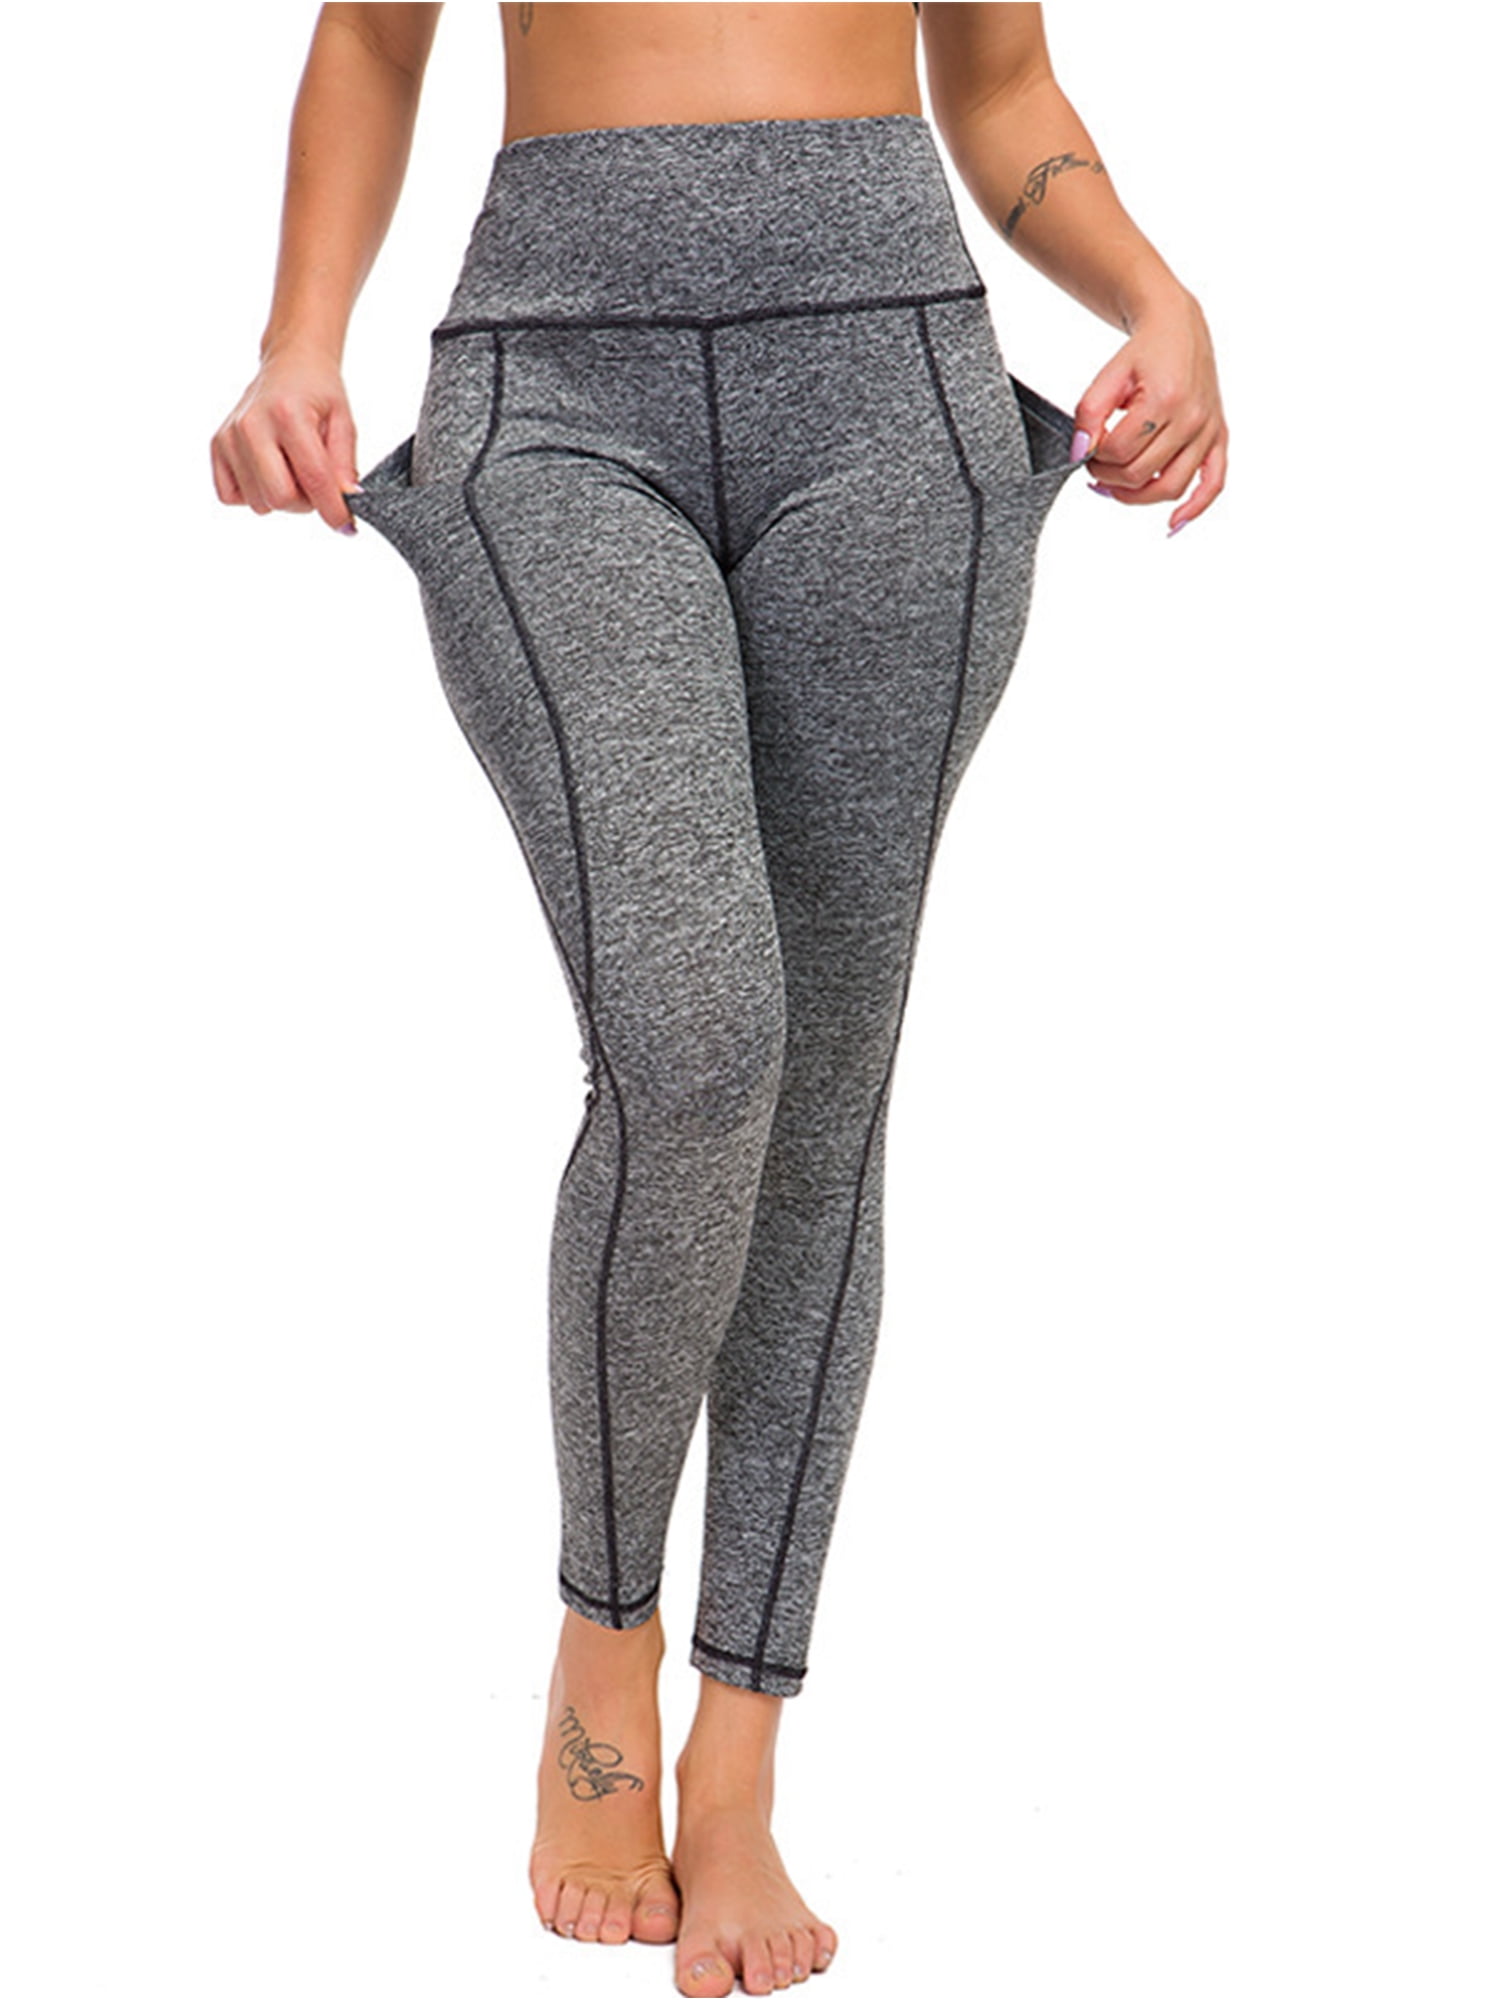 Women High Waist Yoga Pants Active Wear with Pocket Push Up Jogger Leggings  Fitness Gym Workout Athletic Stretch Jogging Pants Plus Size 